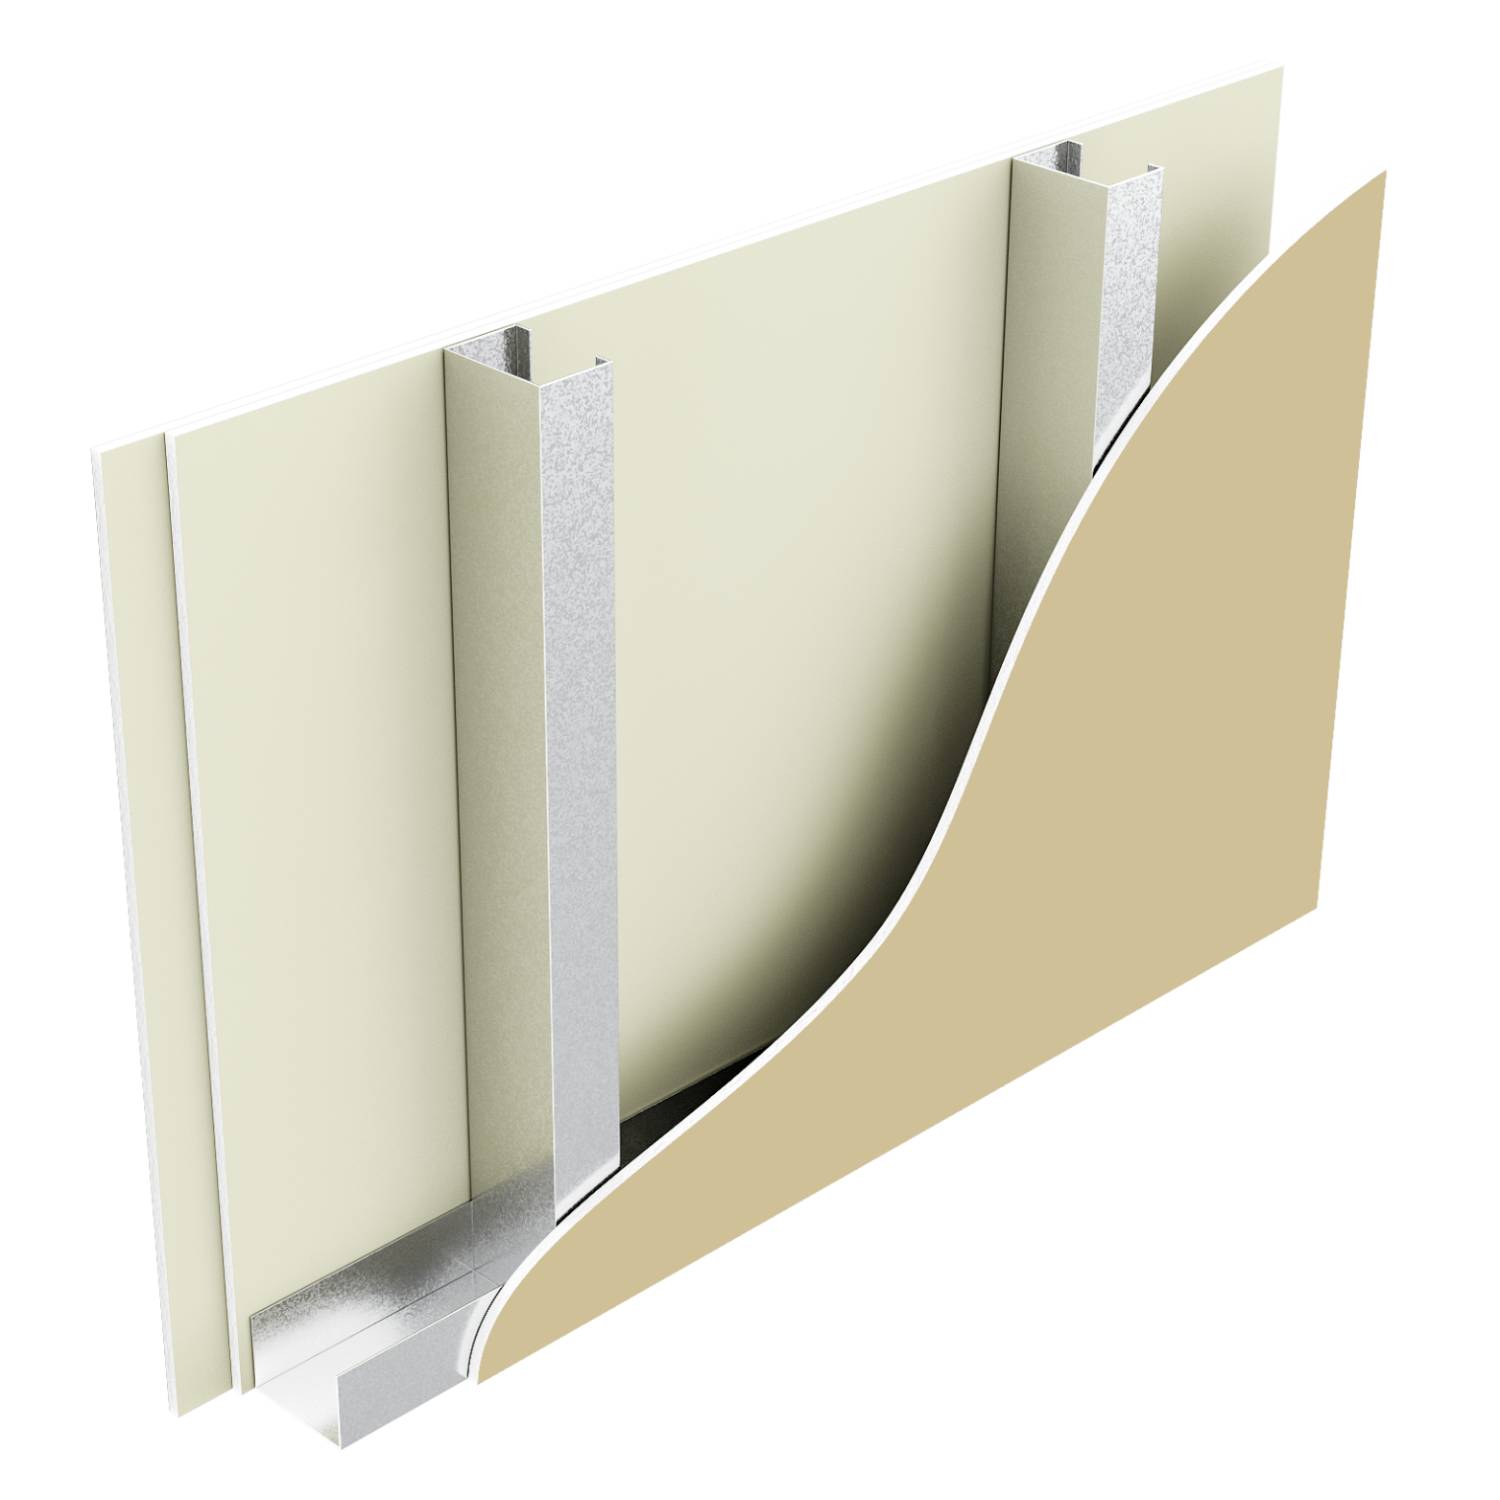 Metsec SFS Infill Wall with Y-Wall Sheathing Board, 12.5 mm BG Internal Boards, Fire performance 120 min (non boundary)